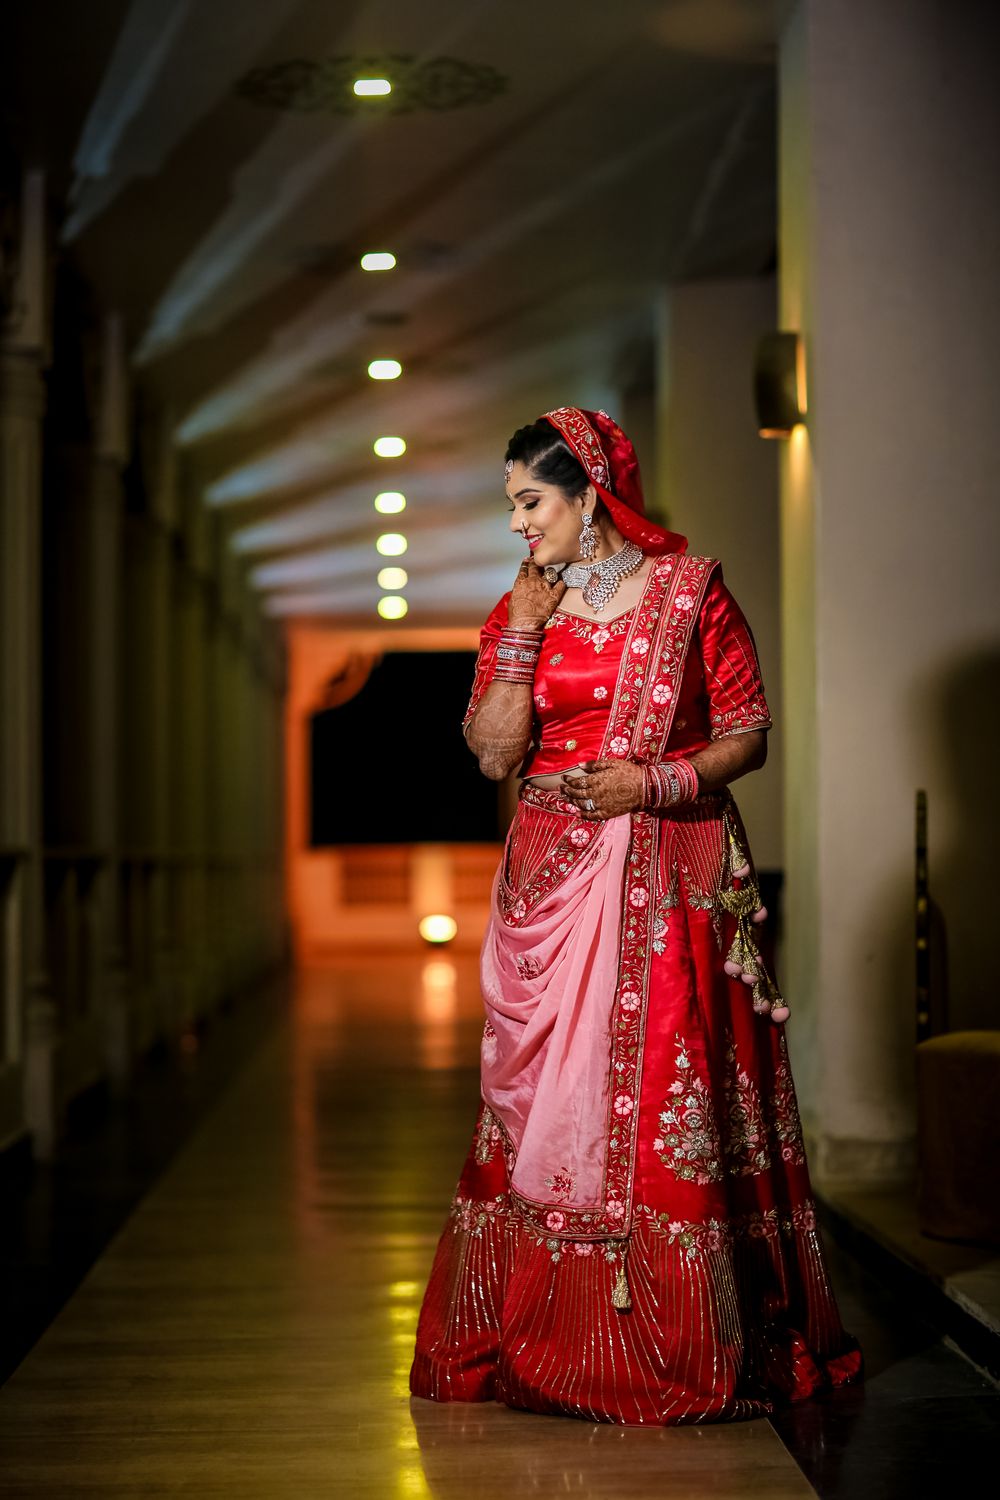 Photo From Wedding Diaries - By Clicks & Movies- The Story Makers